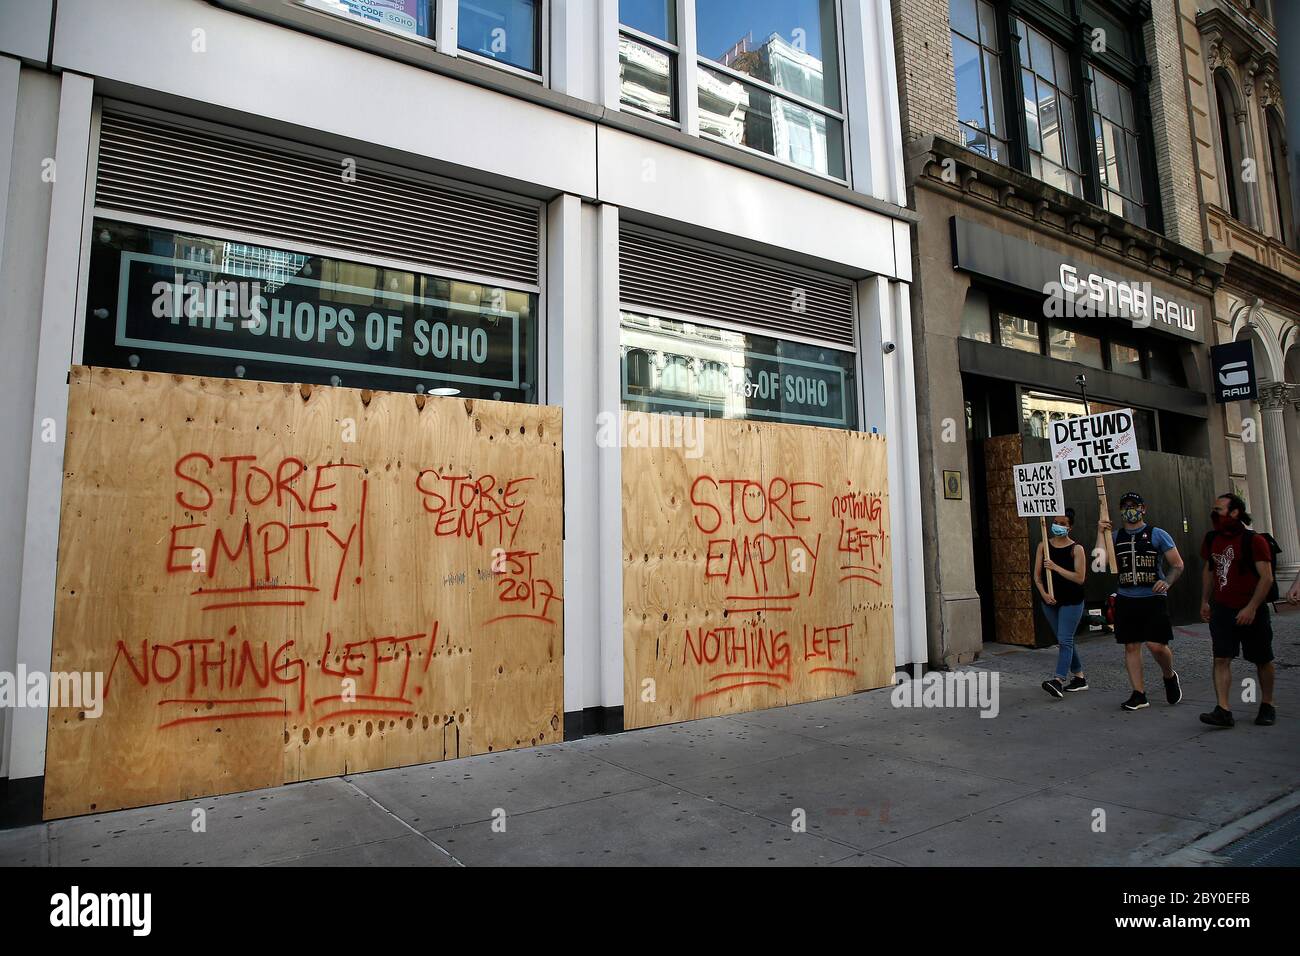 New York, USA. 4th June, 2020. Demonstrators holding placards walk past a boarded up store.Boarded up stores in parts of the city are seen after several nights of looting and fires in New York City. Protesters continue to march in support of racial justice in the boroughs of New York City as the Minneapolis Minnesota police officer, Derek Chauvin faces murder charges in the killing of George Floyd, in court. Credit: John Lamparski/SOPA Images/ZUMA Wire/Alamy Live News Stock Photo